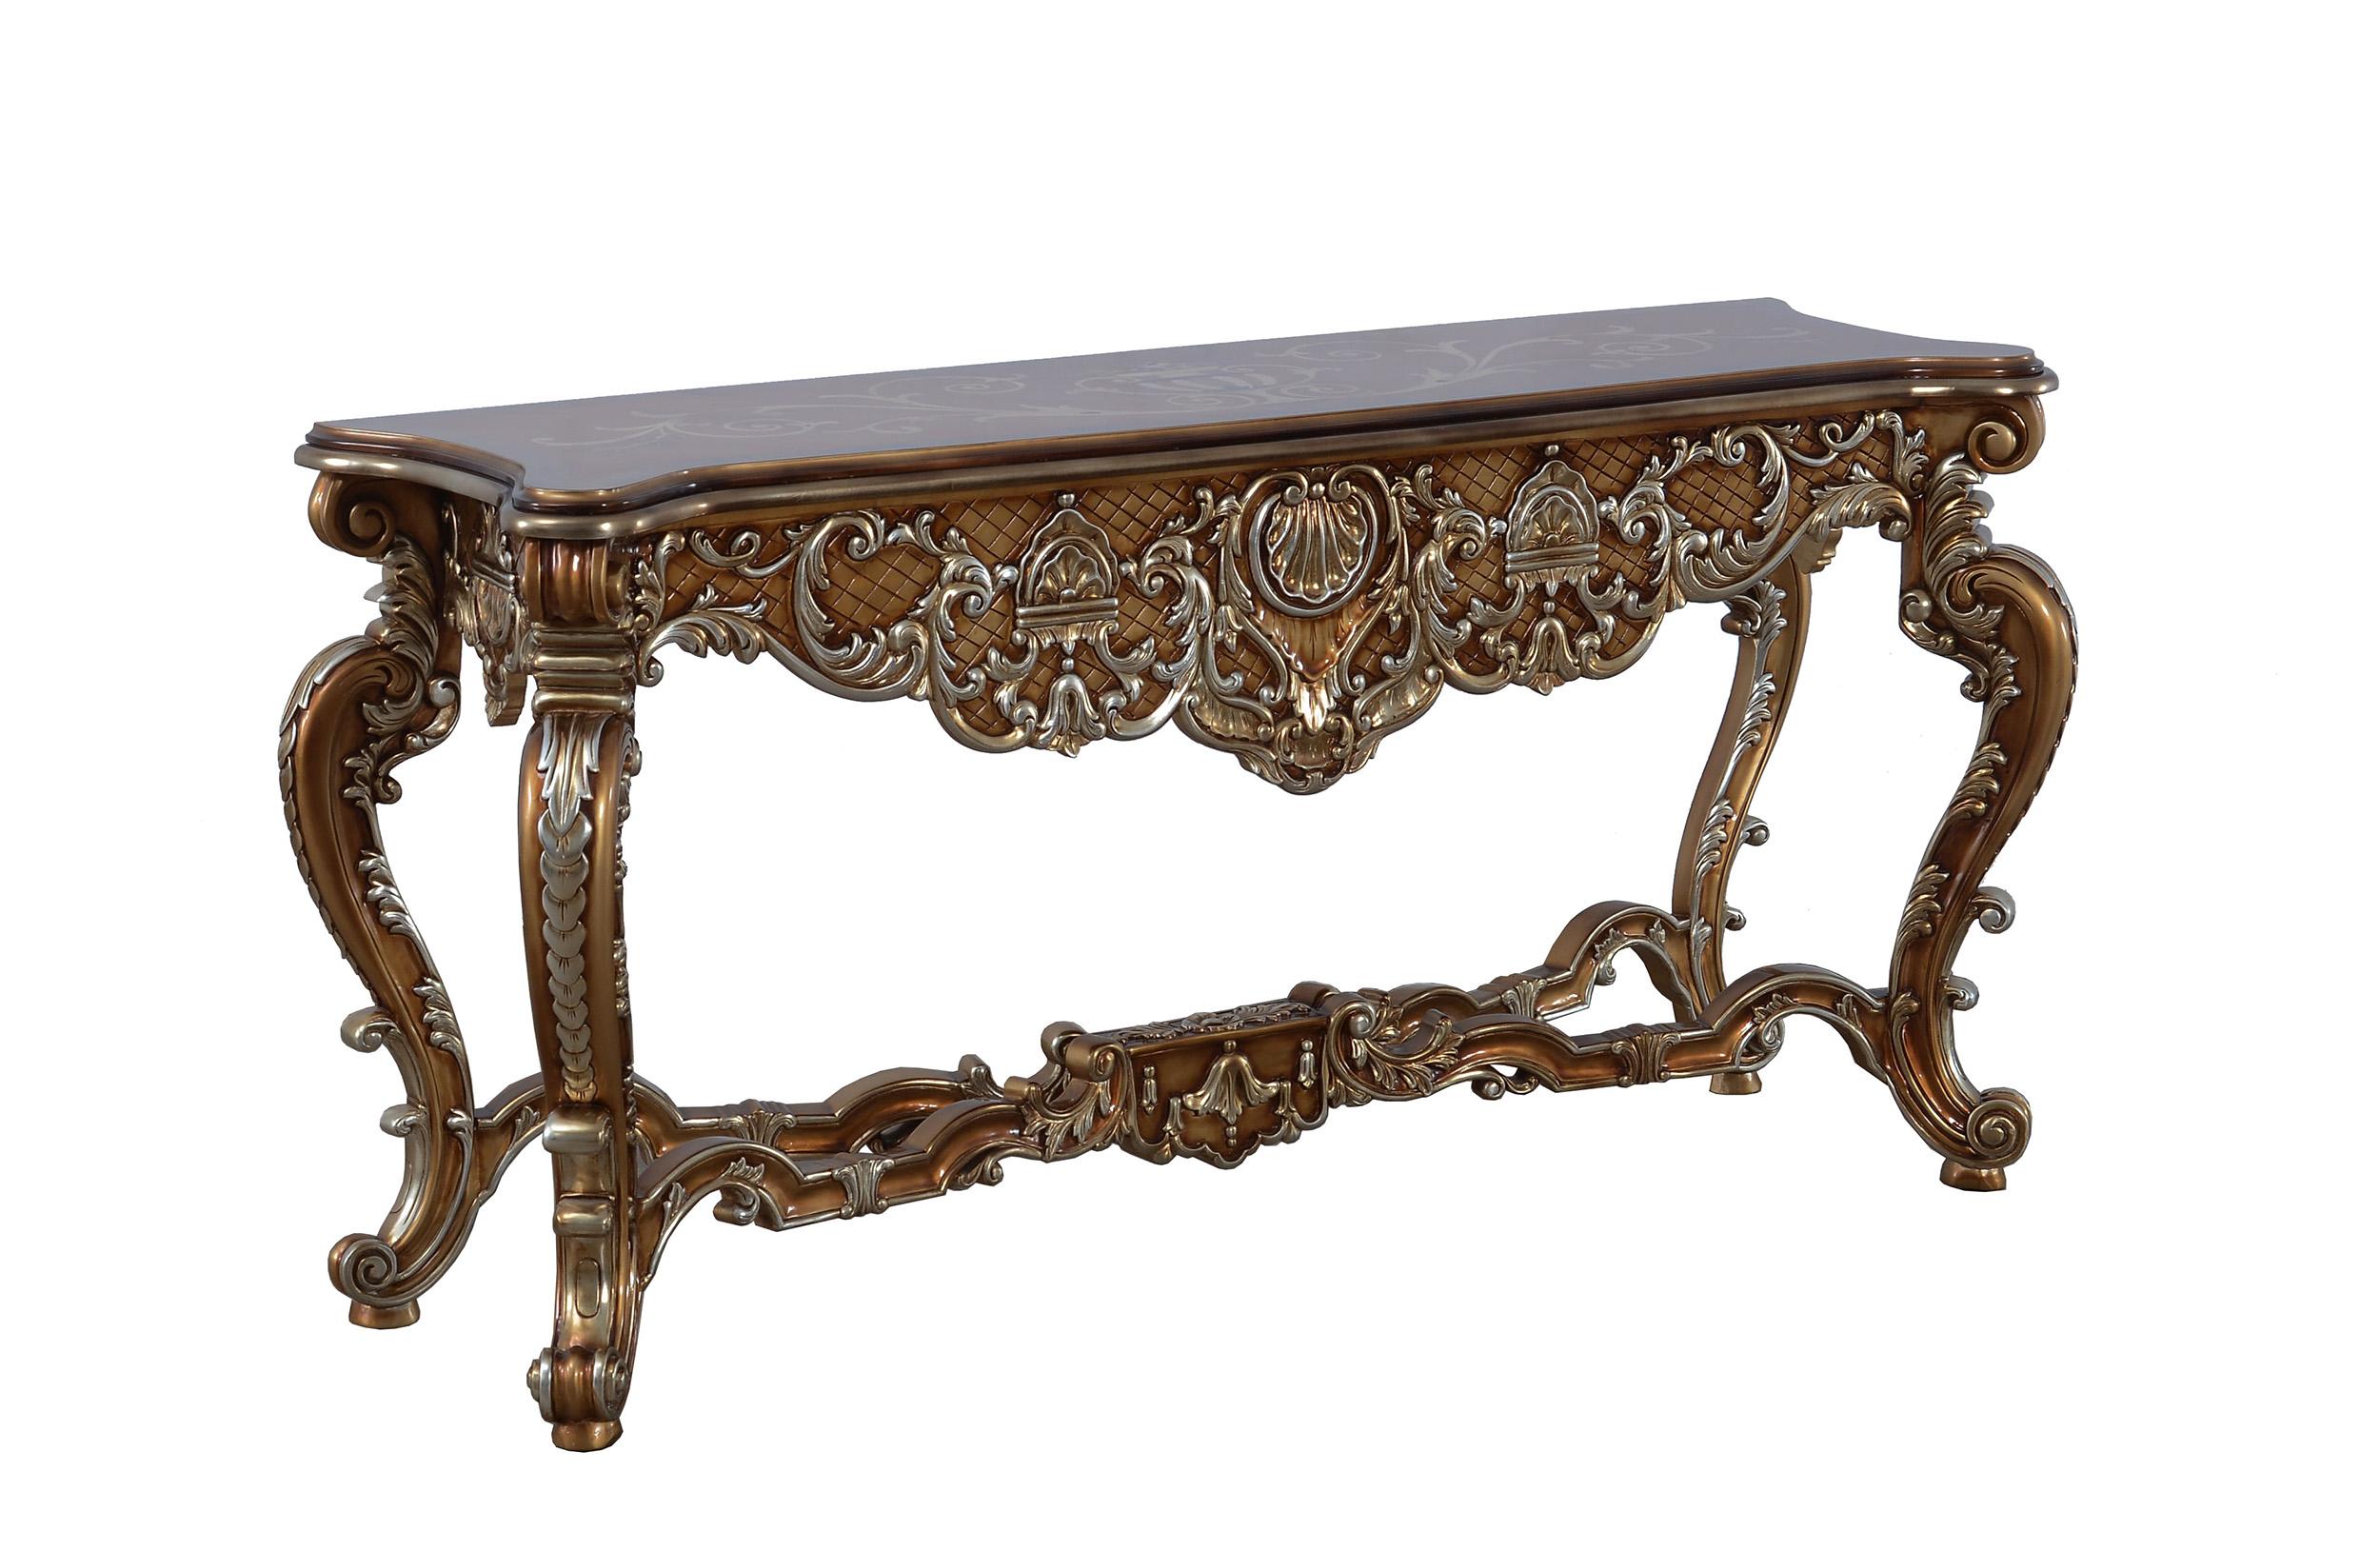 

    
Luxury Brown Gold & Silver Wood Trim Console Table St Germain EUROPEAN FURNITURE
